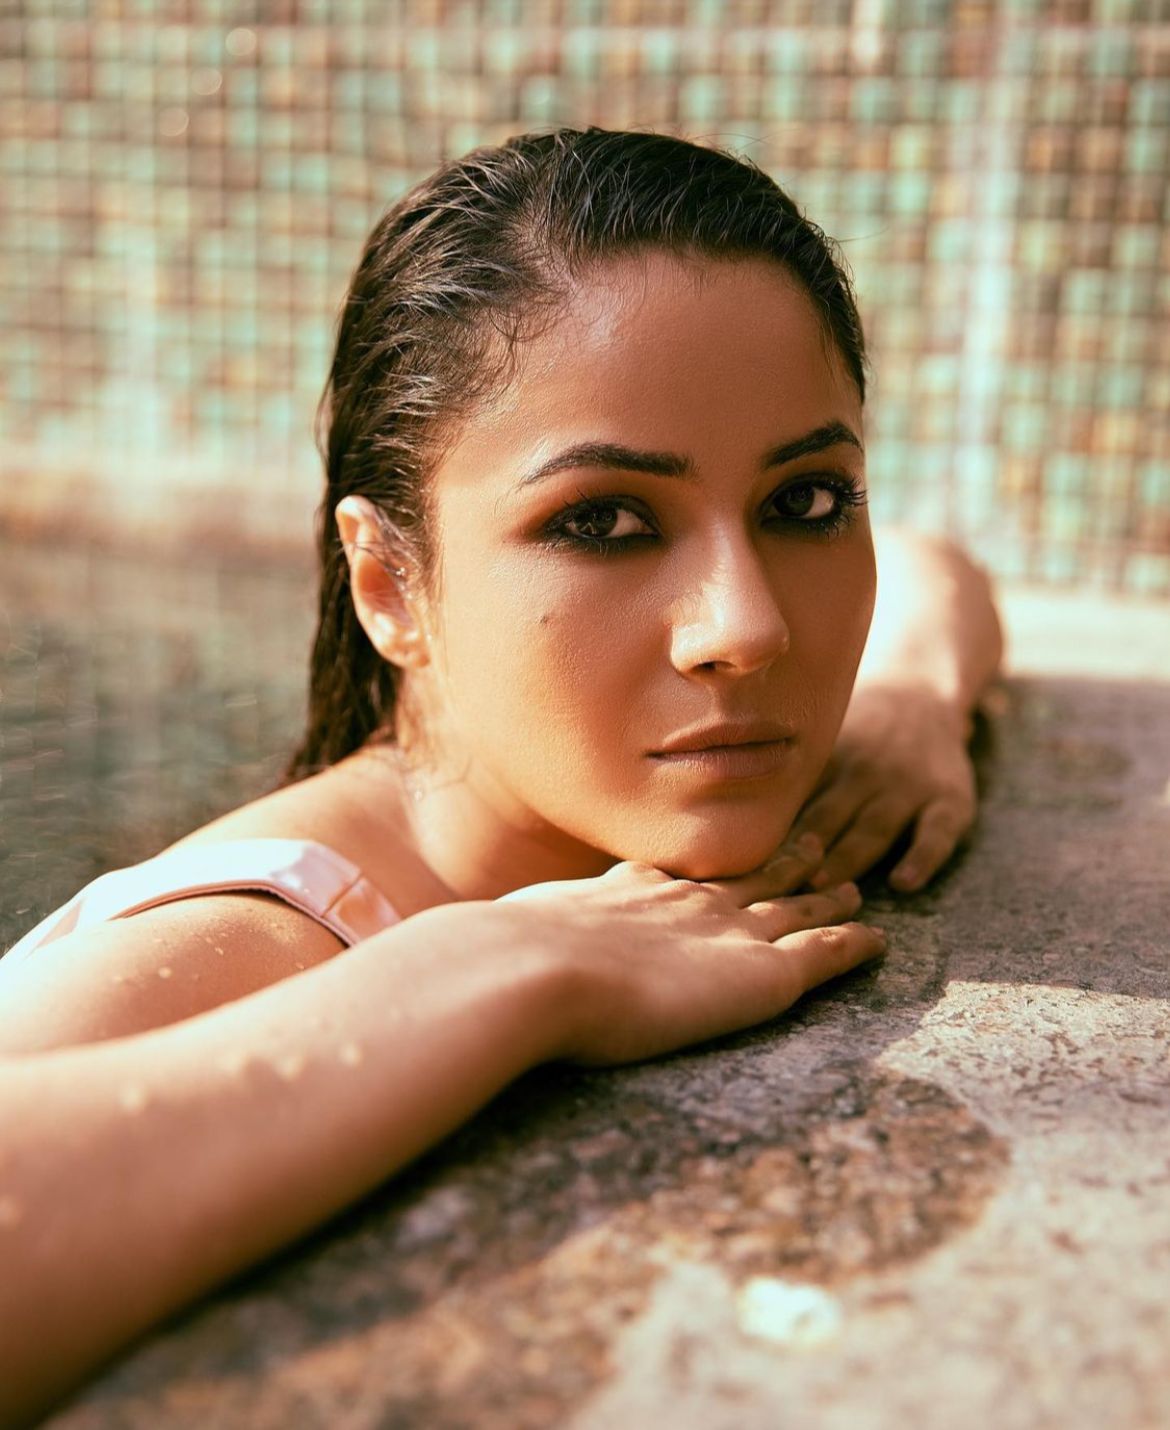 Shehnaaz Gill sets temperatures soaring; netizens say heatwave peak as they swoon over her sultry hot pics in pool